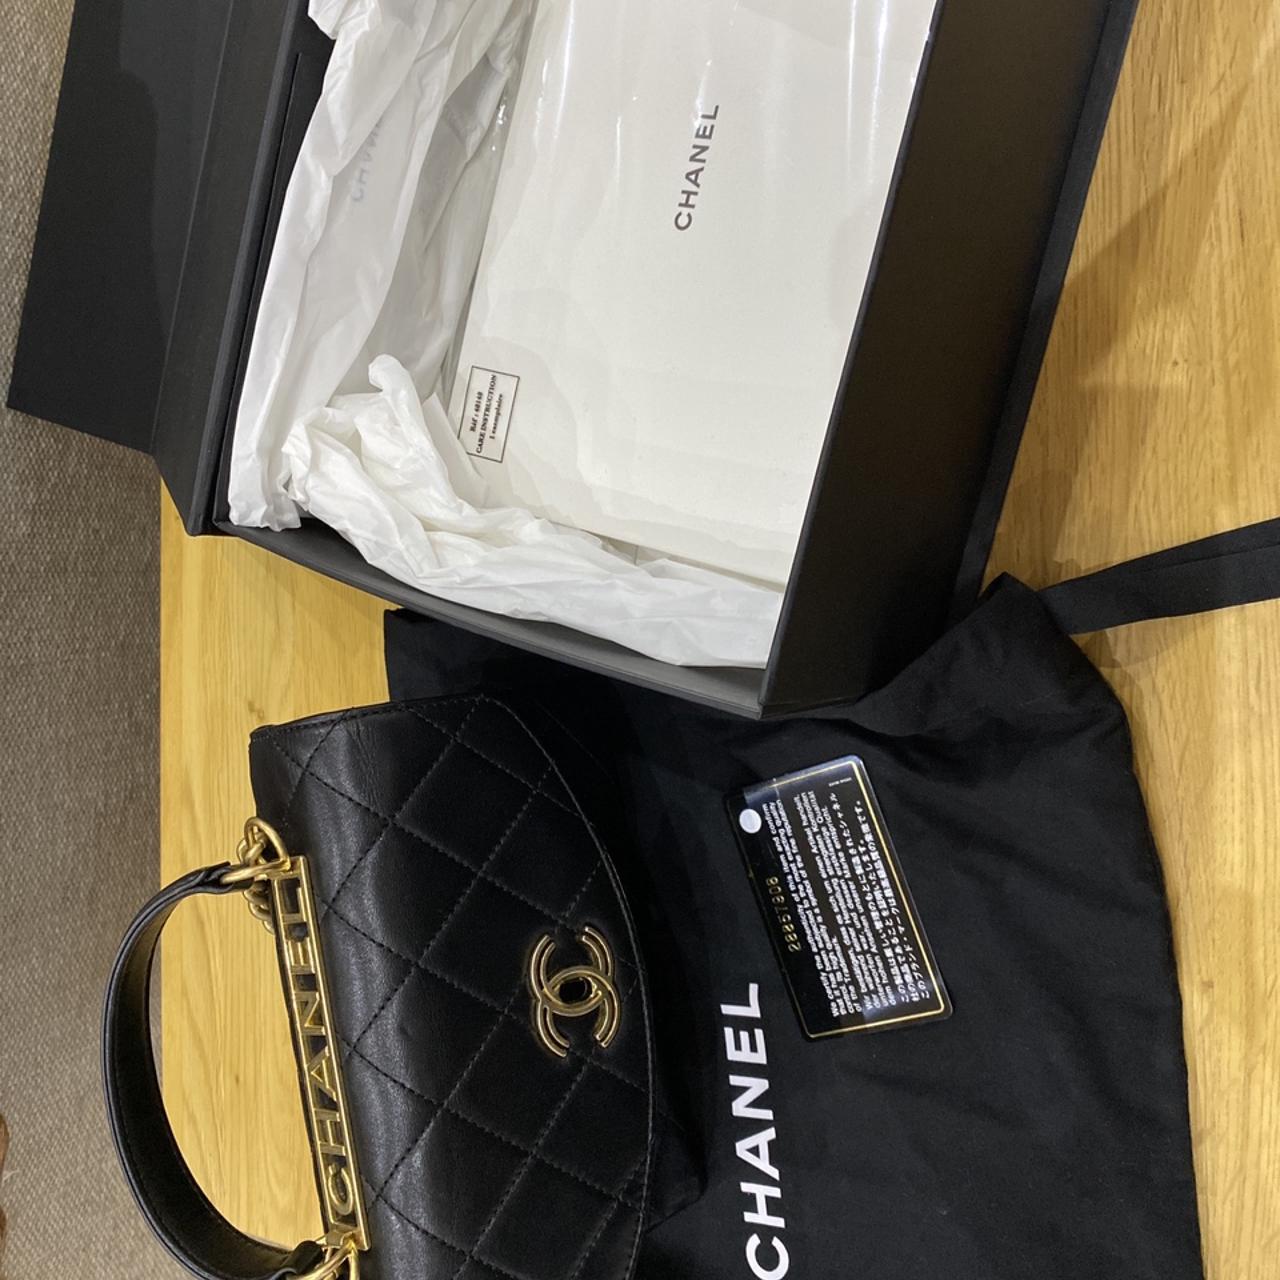 Chanel CC top handle lambskin flap bag Bought from - Depop